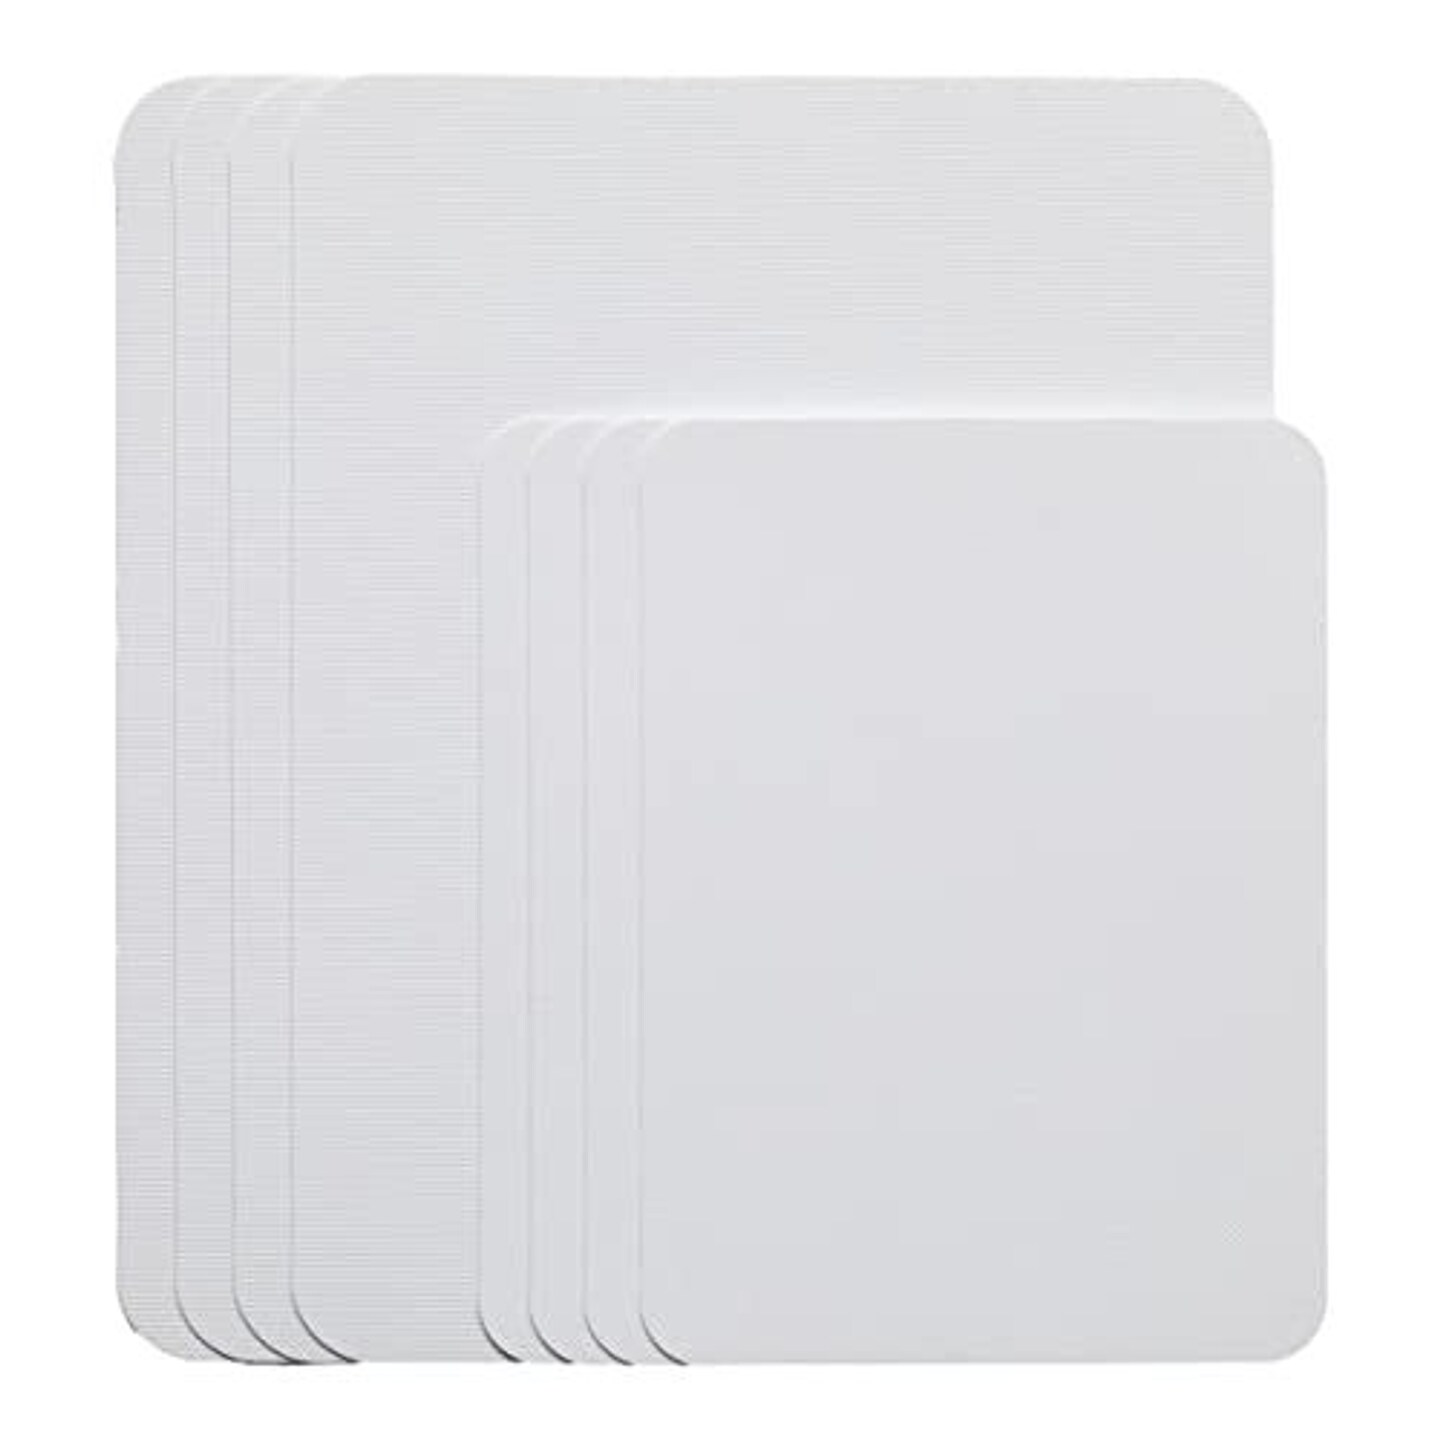 Simply Genius Plastic Cutting Boards for Kitchen - Color Coded Chopping Board Set - Flexible Cutting Mats for Meat &#x26; Vegetables - Dishwasher Safe, Non-Slip, BPA Free (8-Pack White, Mixed Size)